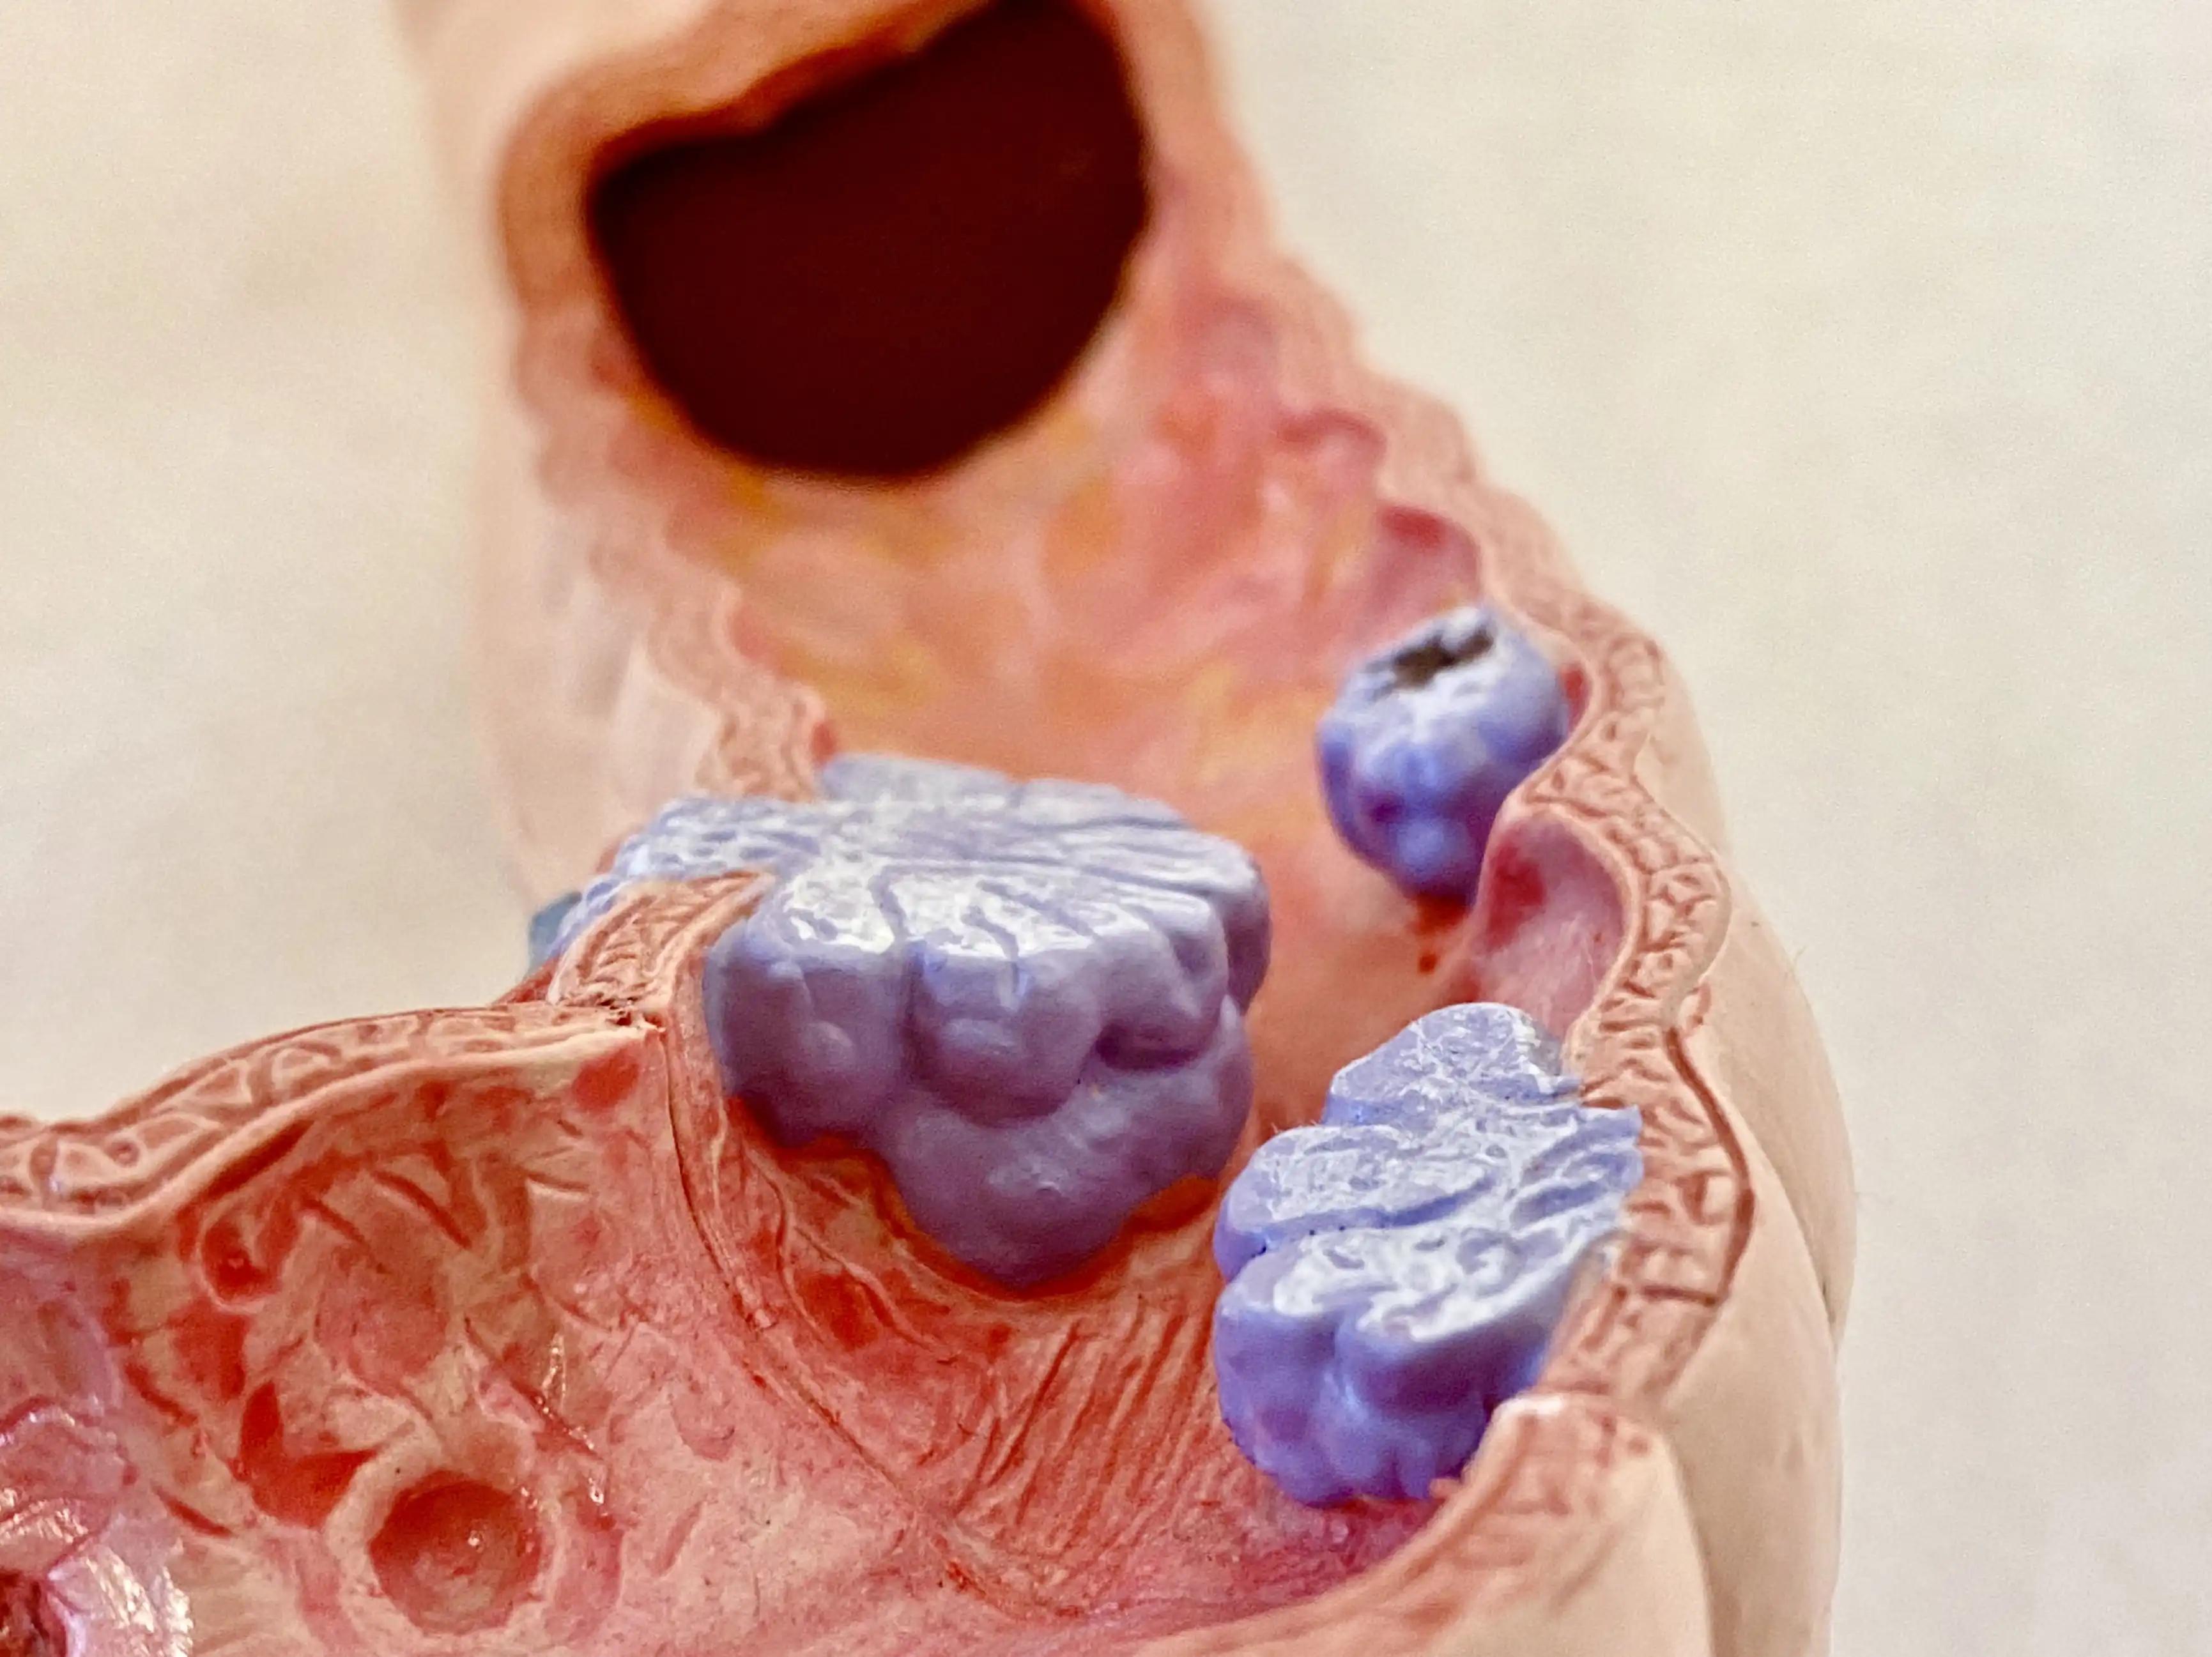 Anatomical Model of Colon Cancer